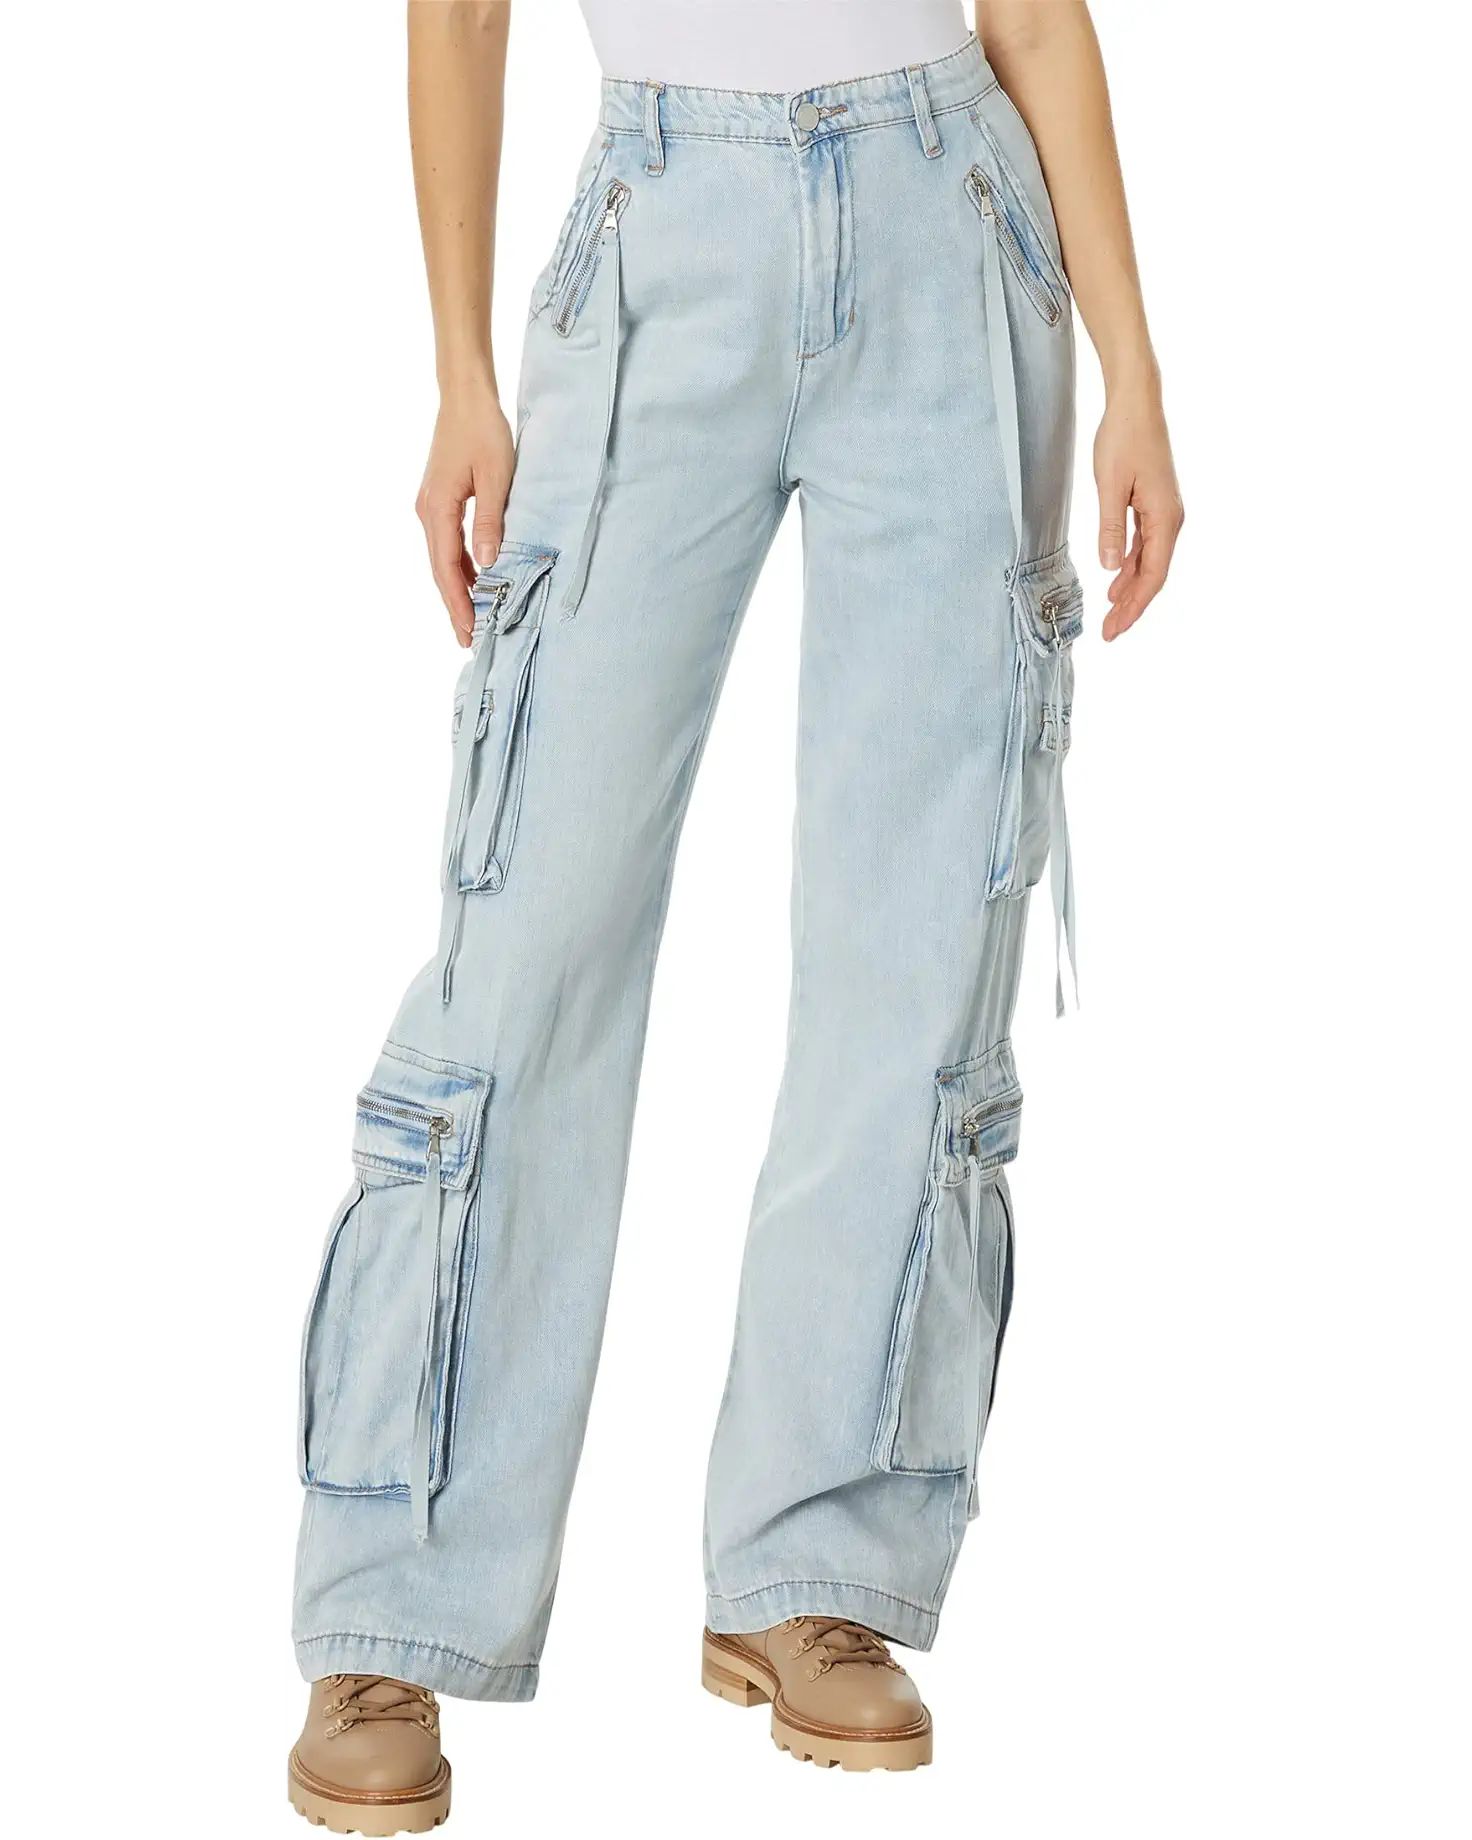 Blank NYC Franklin Rib Cage Pants with Oversized Cargo Pockets in Blue Lagoon | Zappos